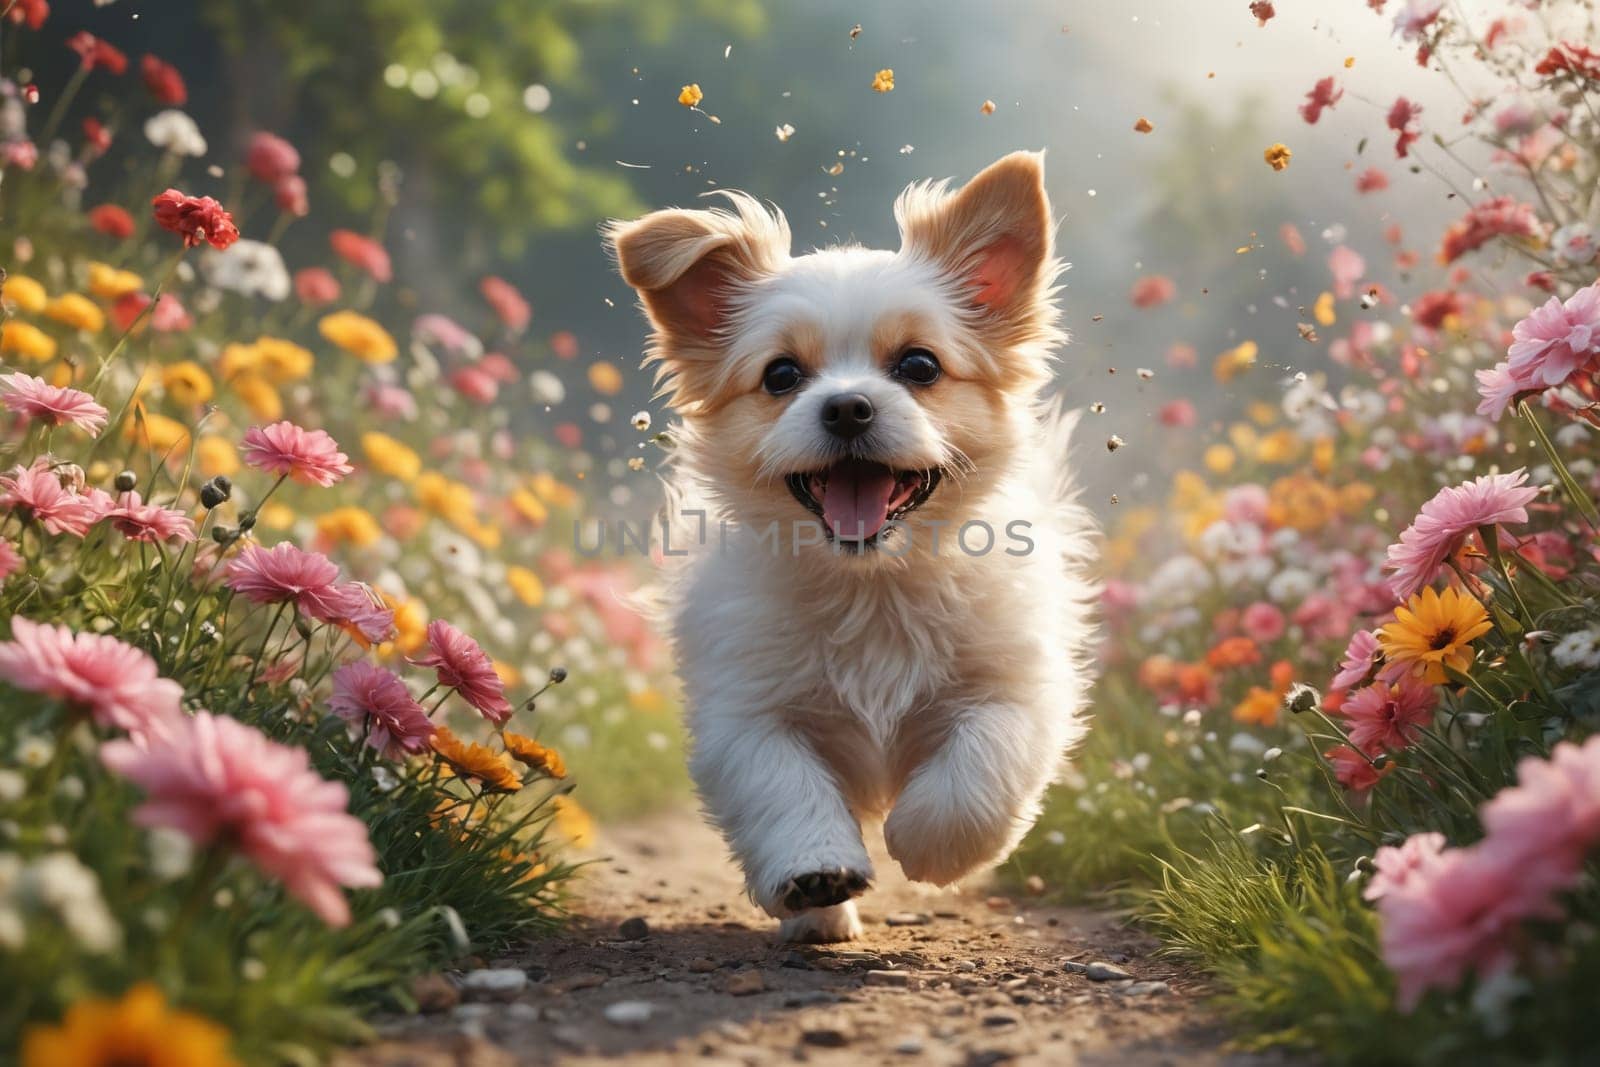 Sprinting into Spring: A Dog's Playful Adventure in Blossoming Garden by Andre1ns